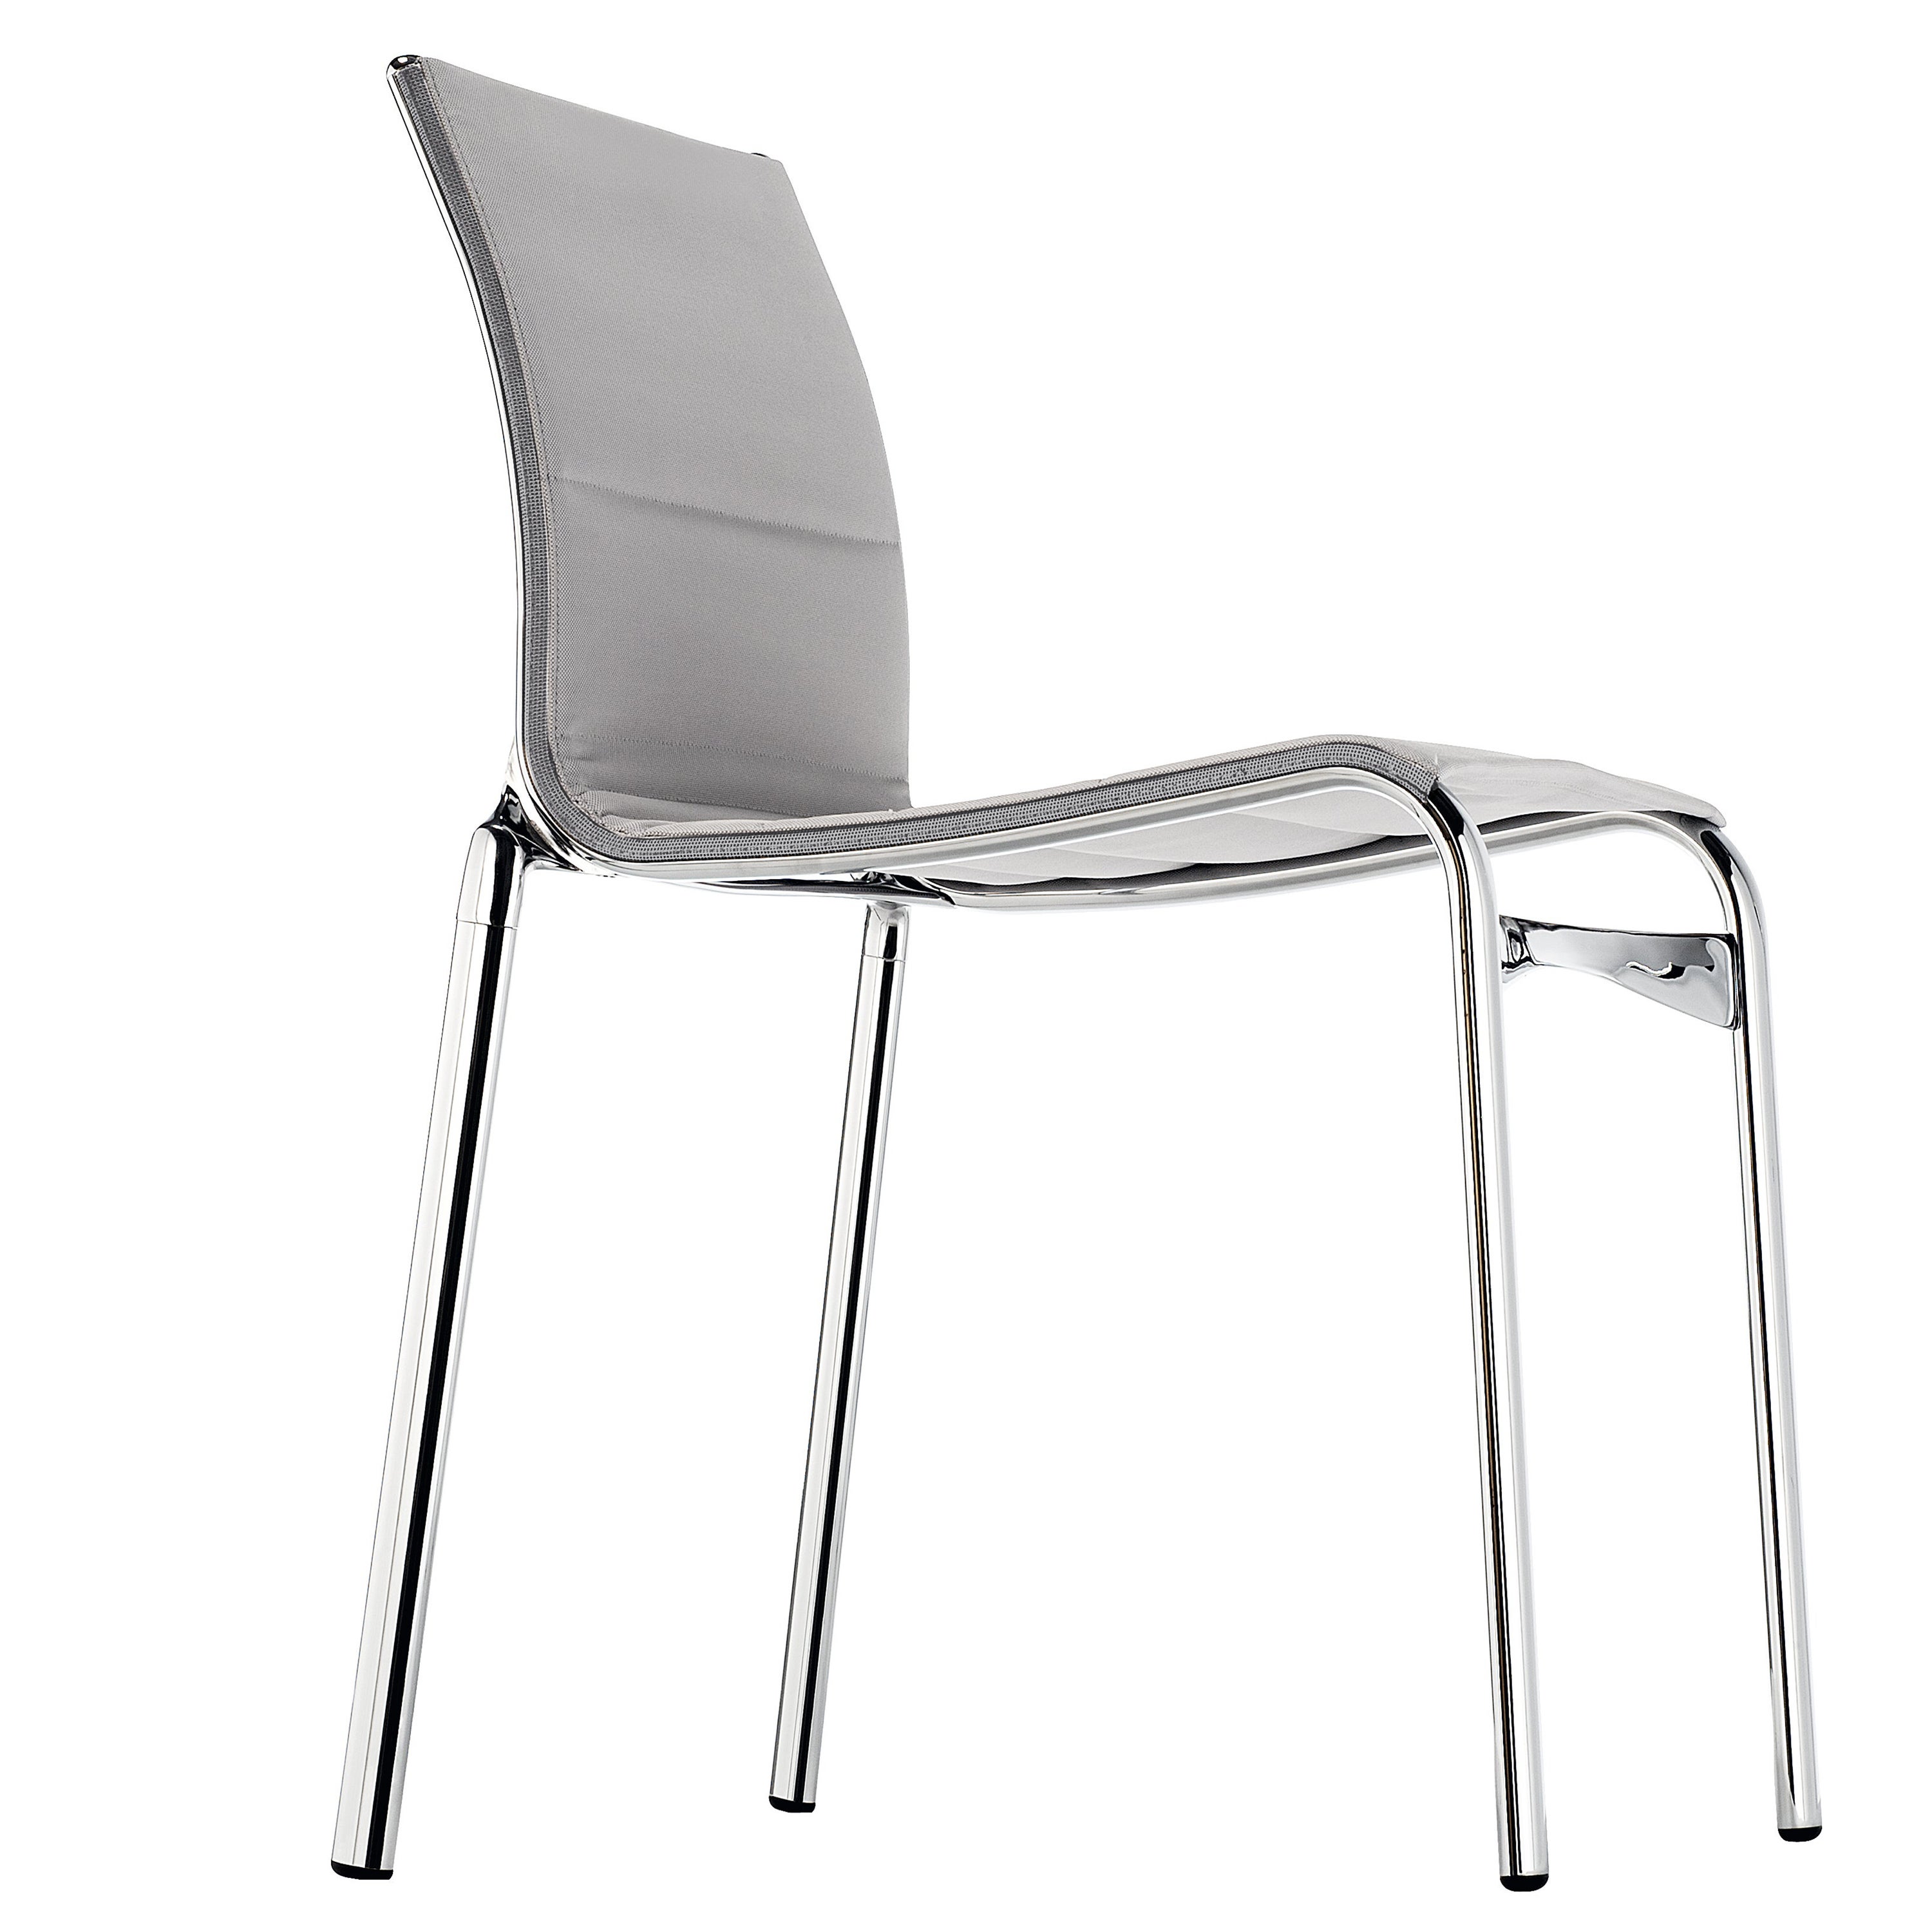 Alias Highframe 40 Chair in Grey Upholstered Seat with Chromed Aluminium Frame For Sale